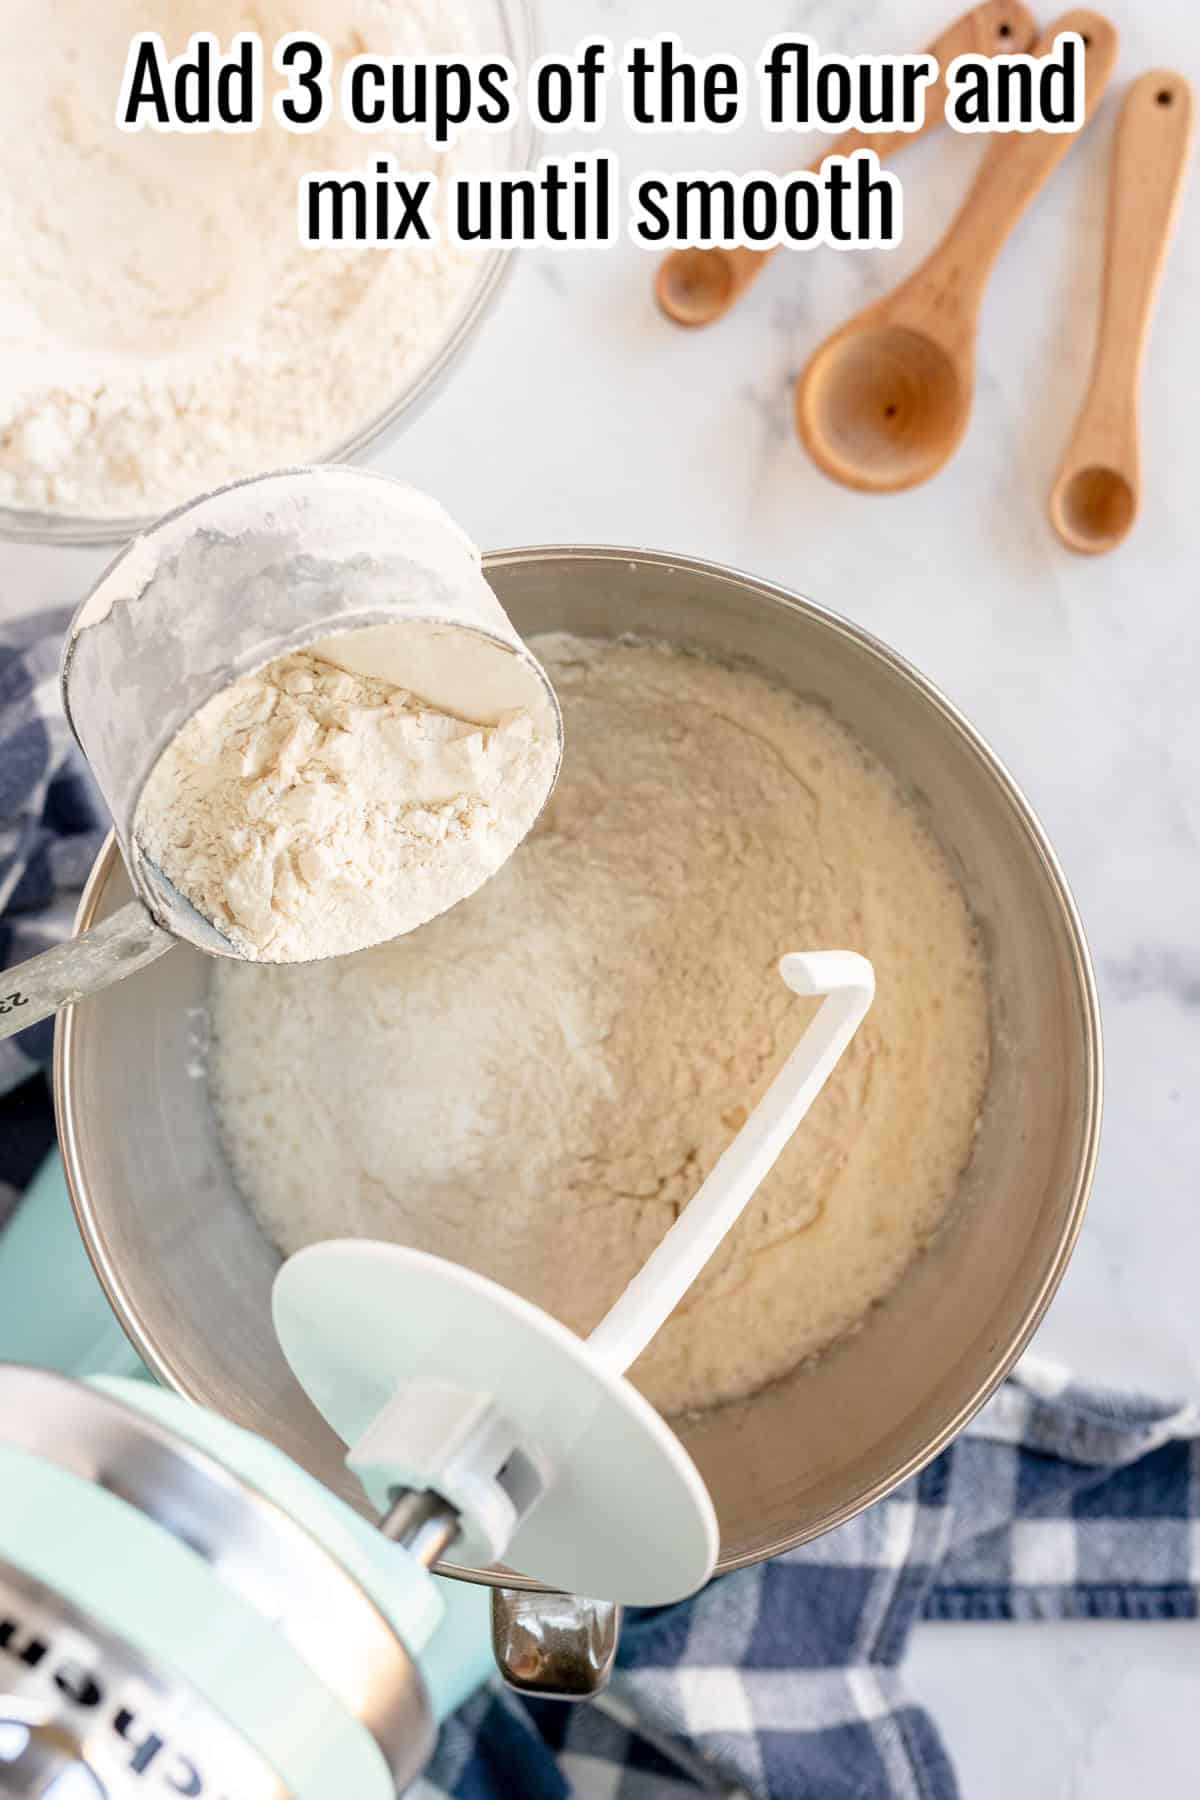 A mixing bowl with flour and a measuring cup pouring additional flour. The text above instructs to add 3 cups of flour and mix until smooth for perfect sandwich bread. Wooden measuring spoons are in the background.